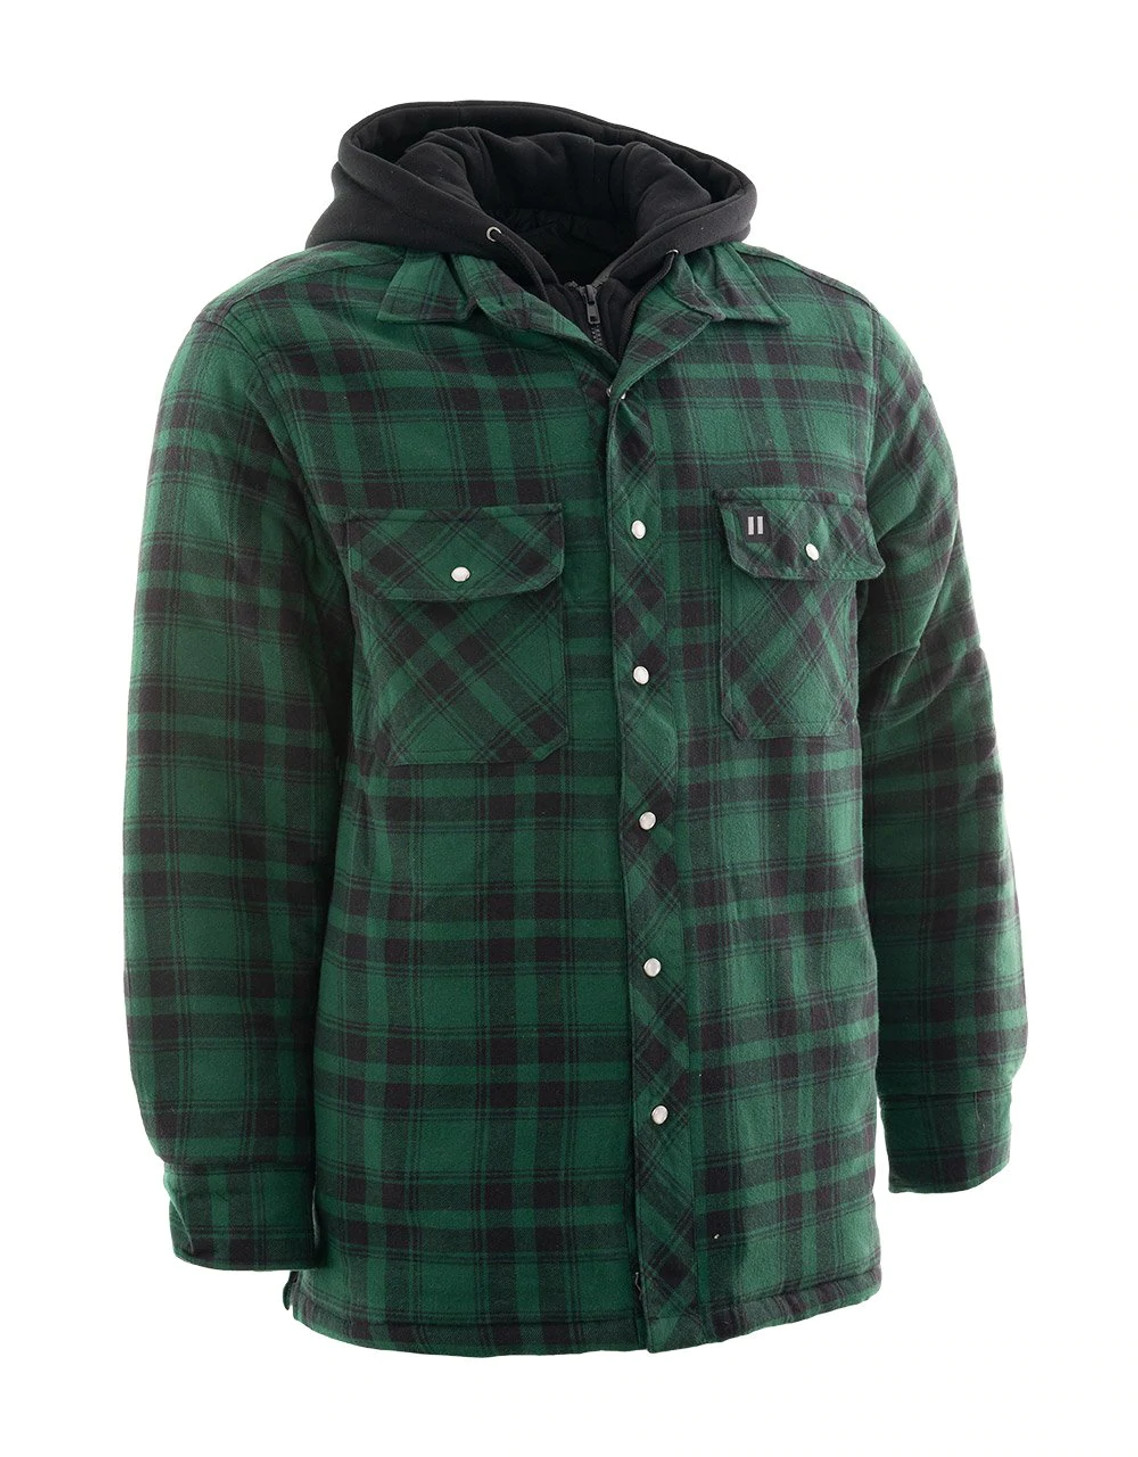 Forcefield Green Plaid Hooded Quilted Flannel Shirt Jacket | Safetyapparel.ca